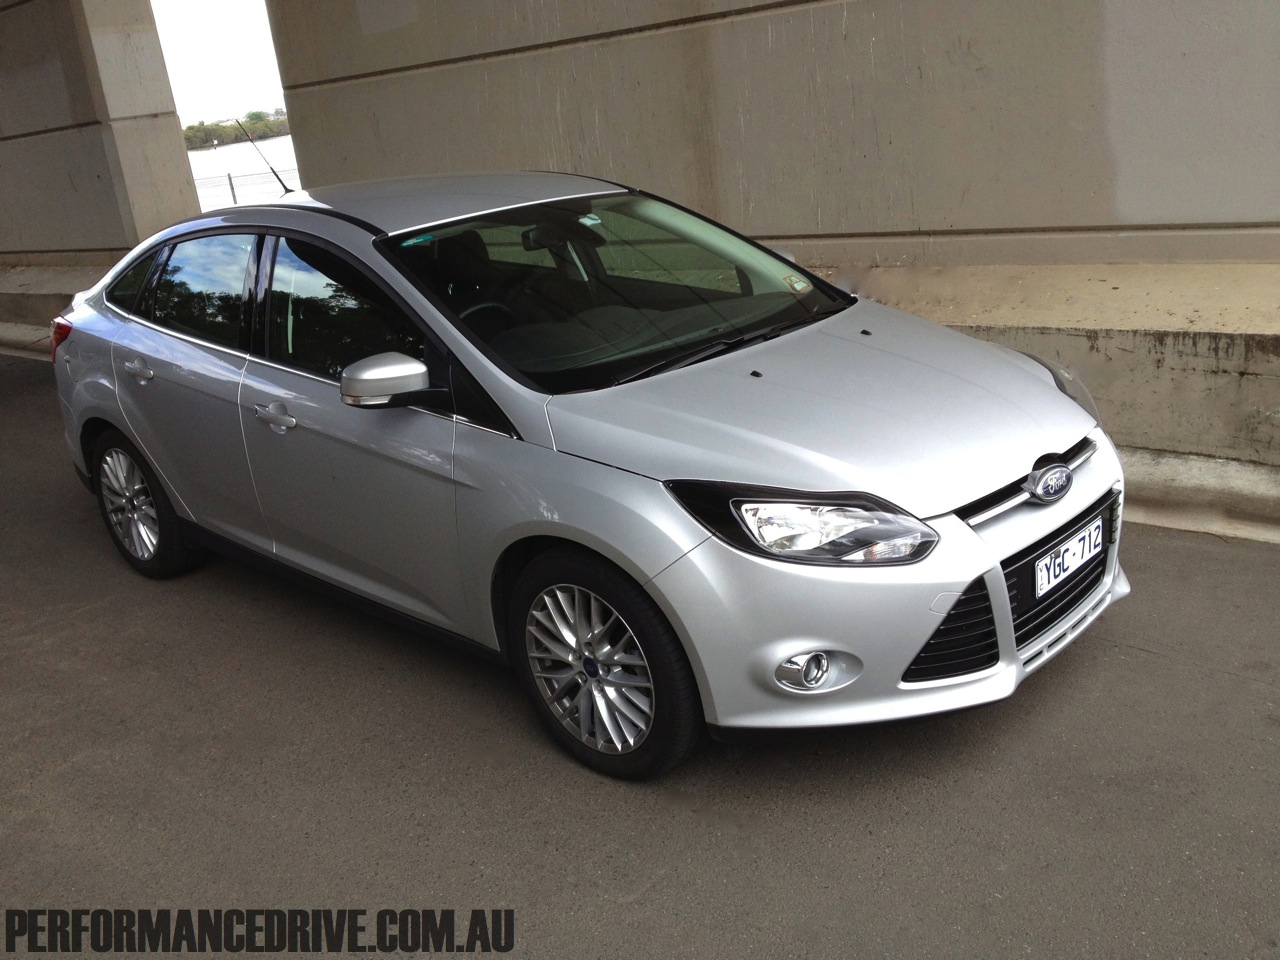 2012 Ford Focus Sport TDCi review – quick spin